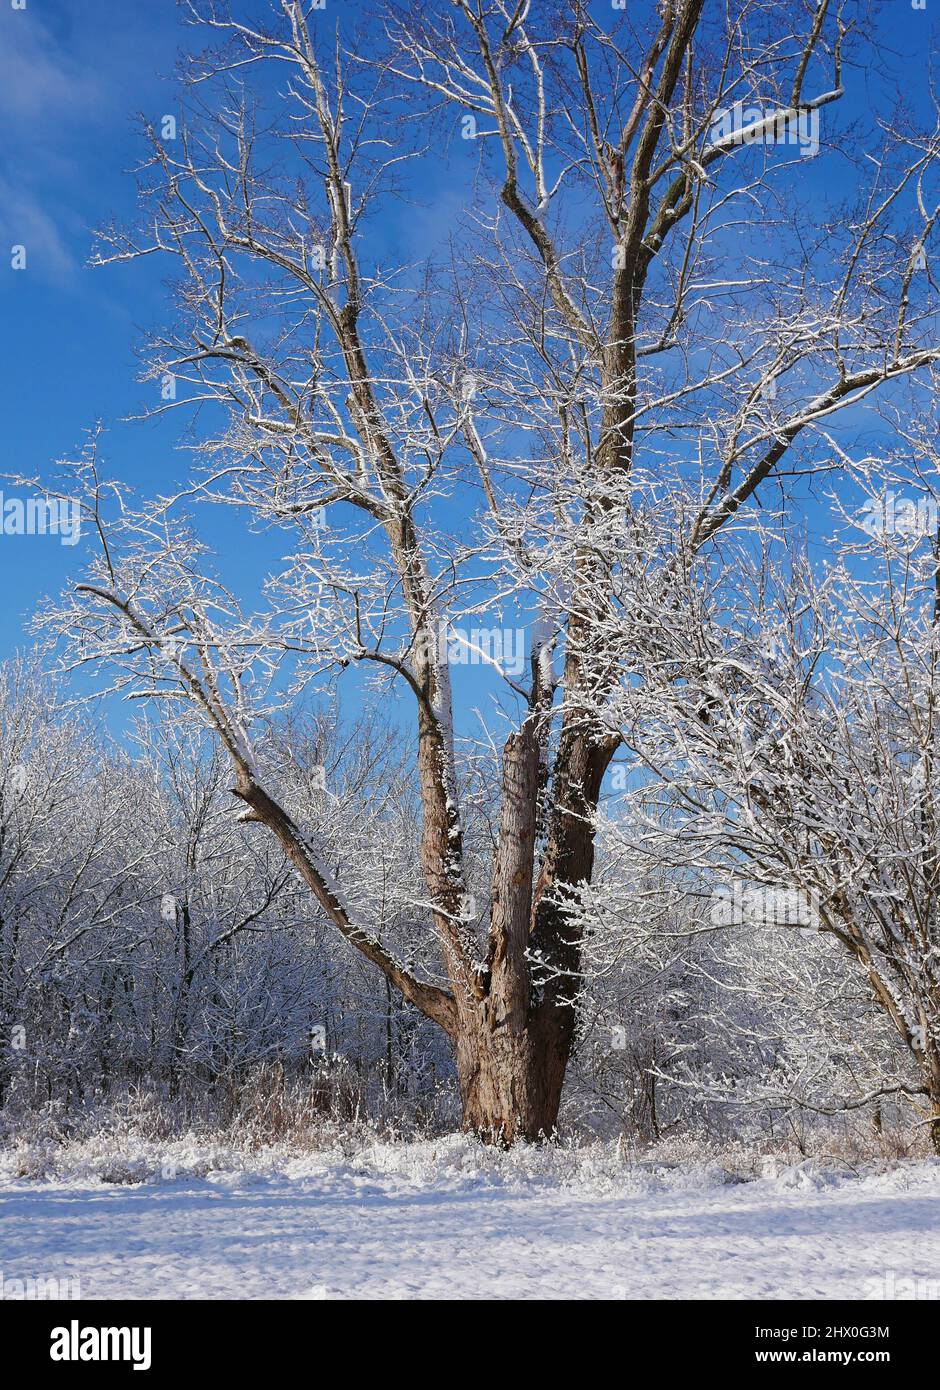 A portrait image of a large tree covered in snow in the morning after a fresh snowfall. Stock Photo